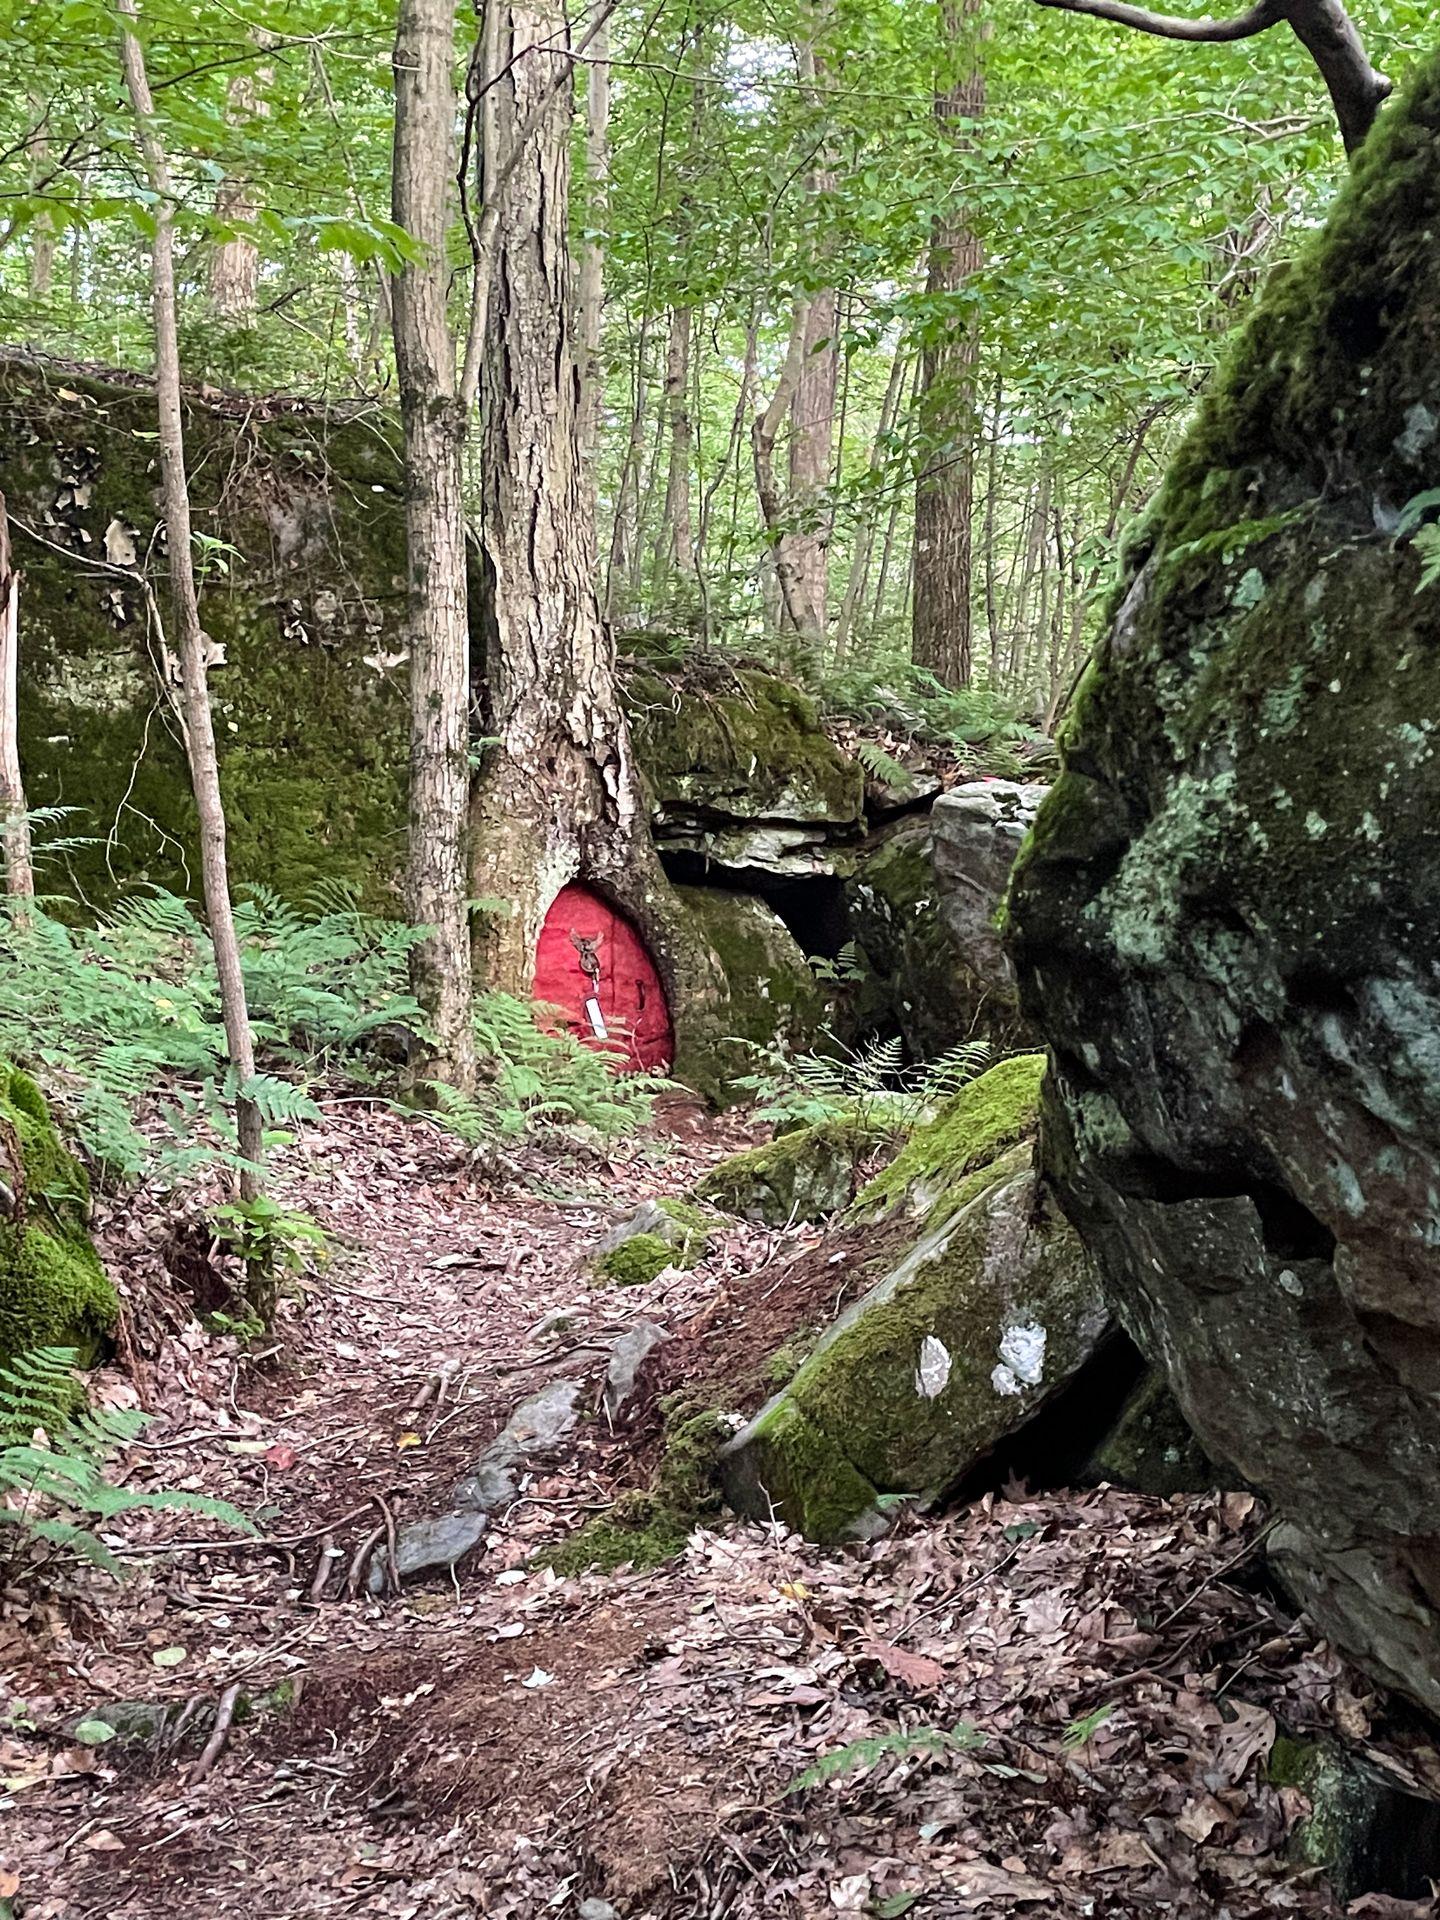 An area of moss-covered rocks and trees on a trail near the Hobbit House. On the tree, there is mini a red door. A white clue hangs on the outside of the door.